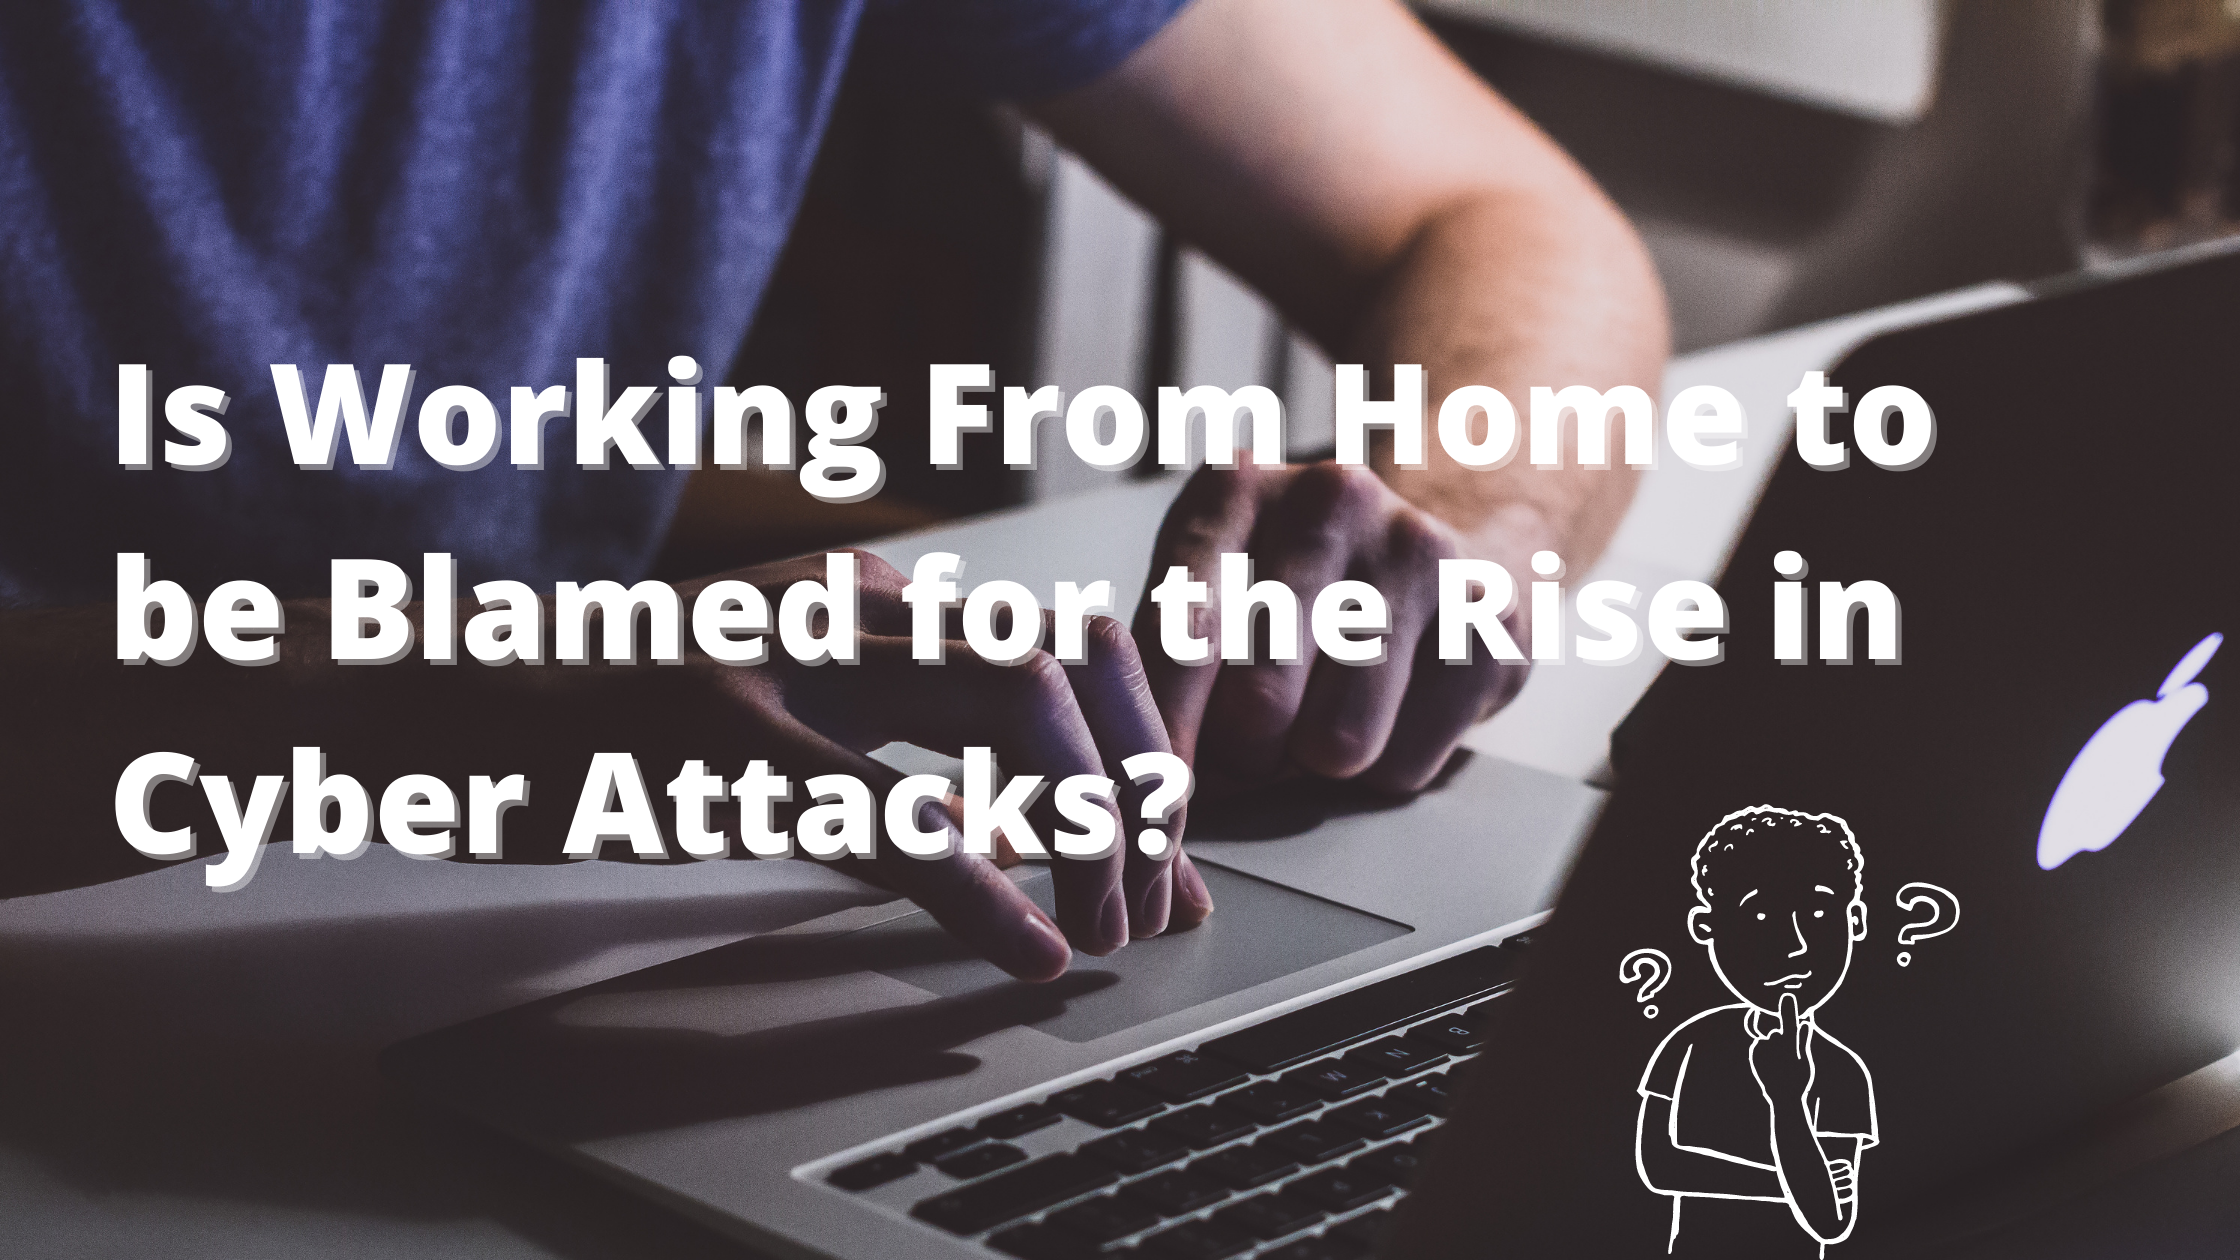 Is working from home to be blamed for the rise in cyber attacks?